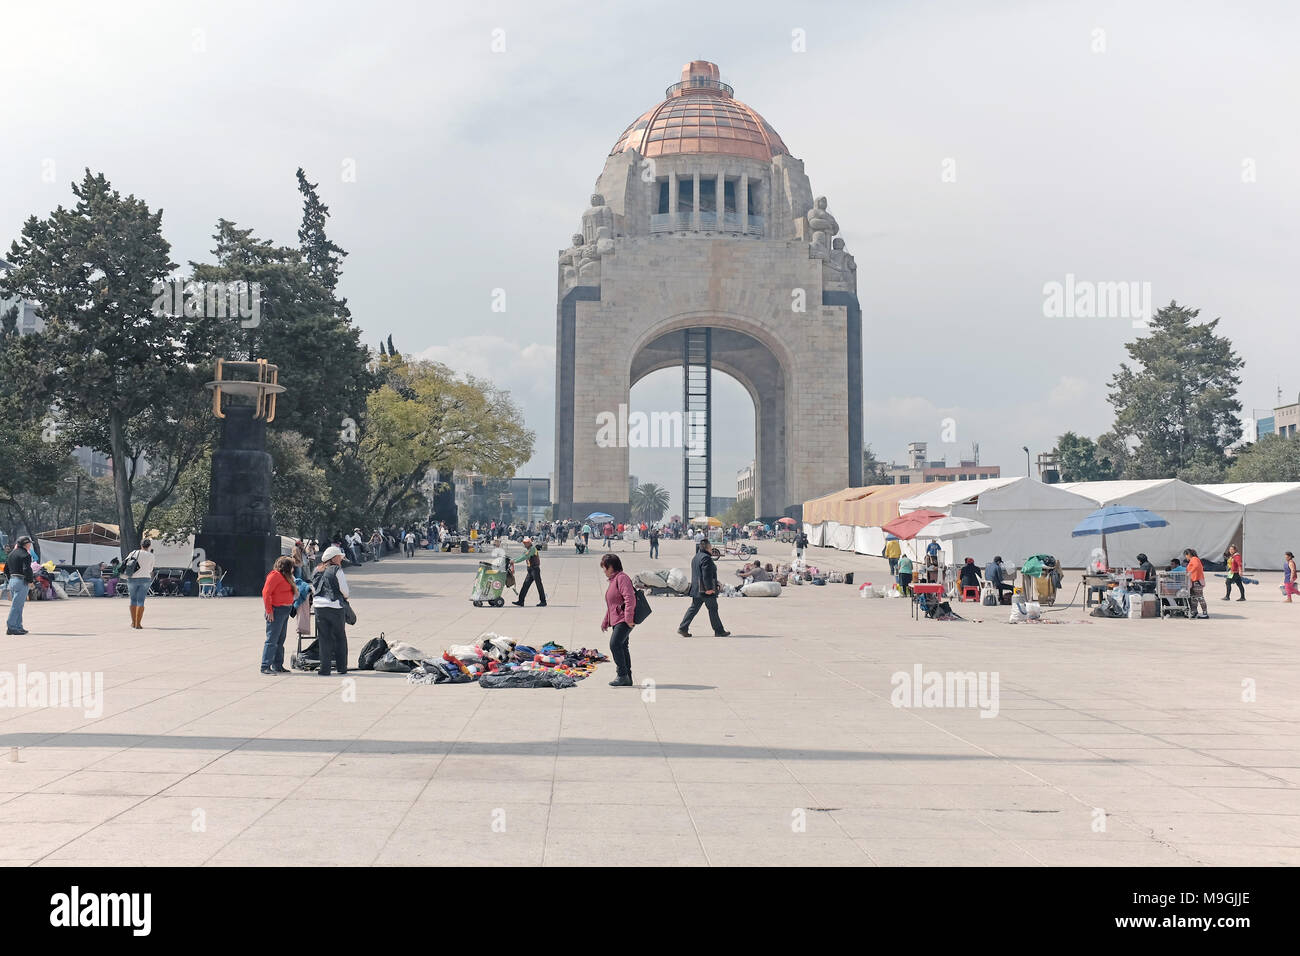 The Plaza de la Republic with the Monument de la Revolution is a popular area for protesting varying issues impacting the Mexican people. Stock Photo